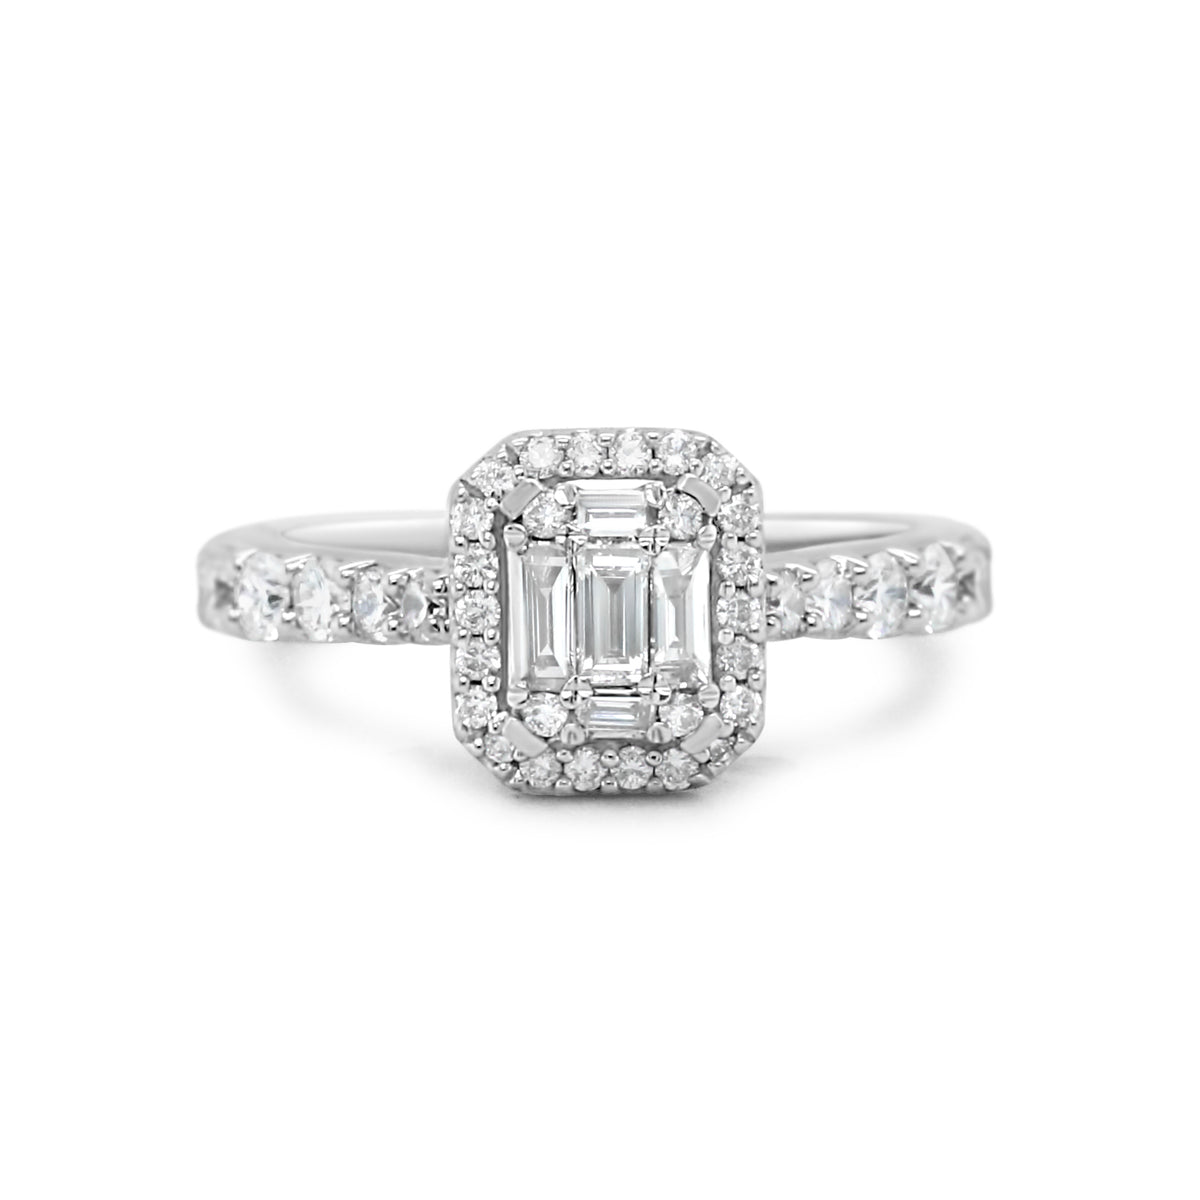 14k white gold emerald and round cut diamond estate engagement ring with diamond halo and accent stones